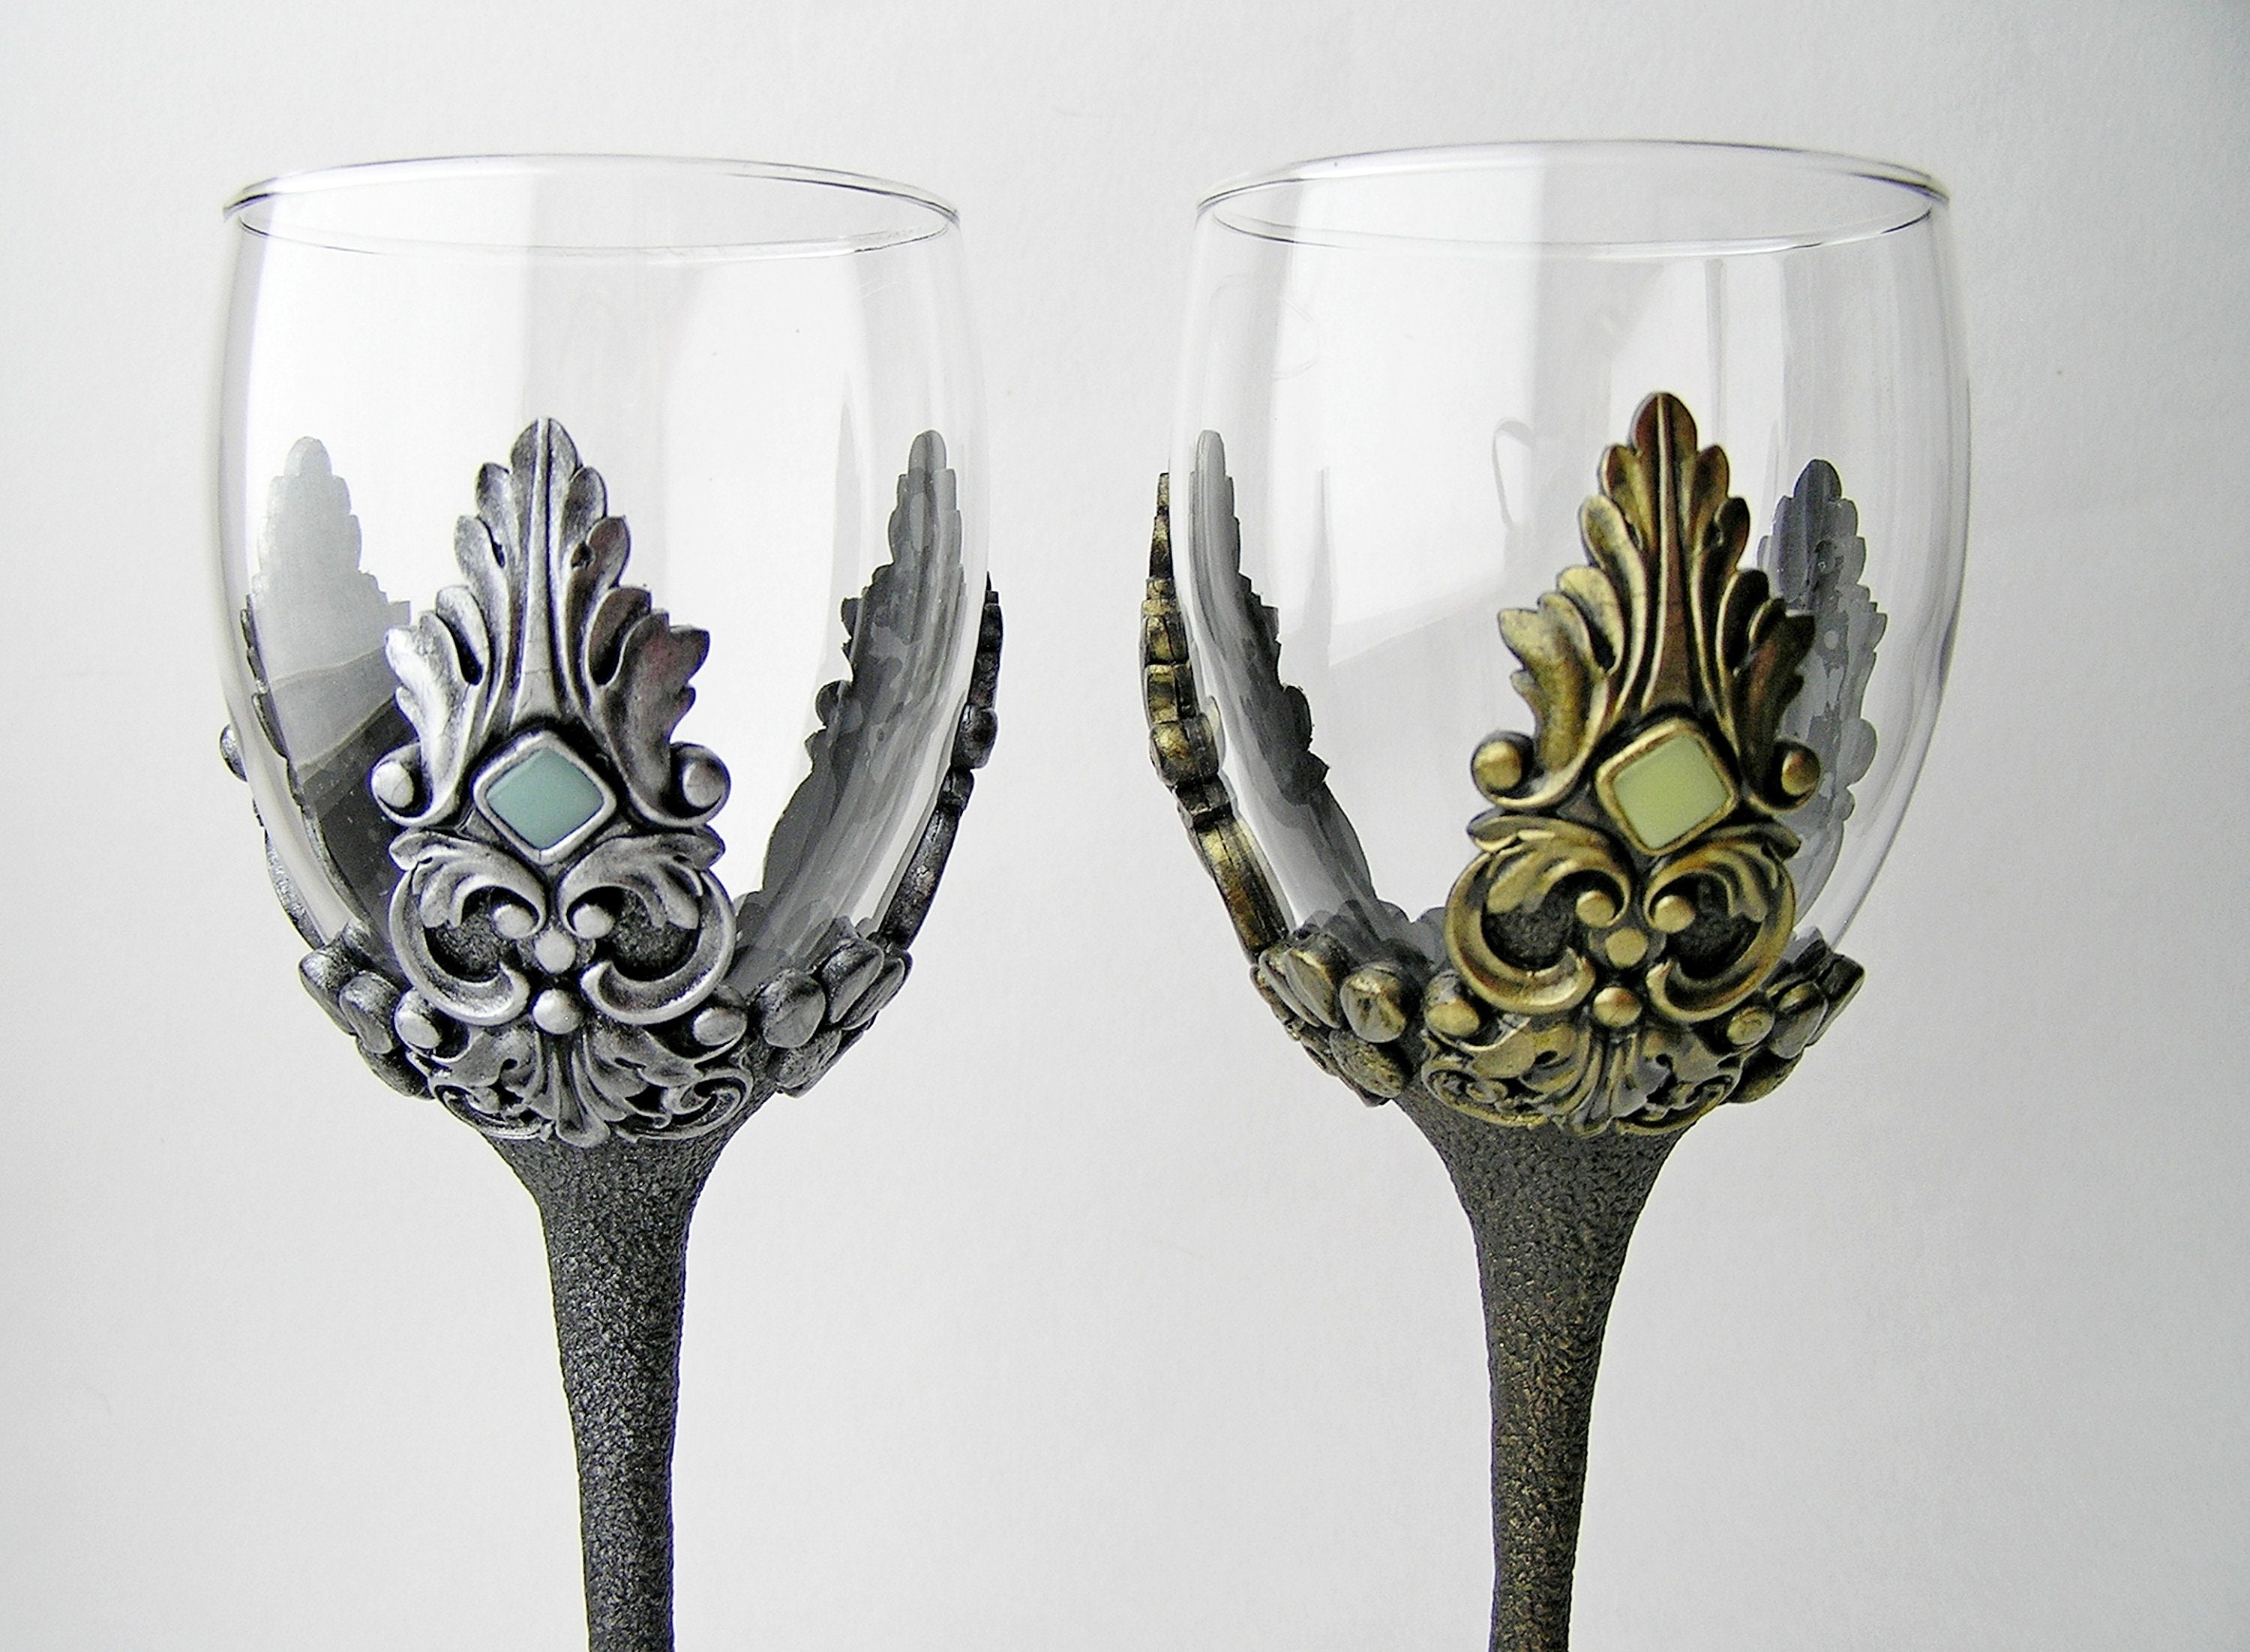 Antique Style Medieval Gold Goblets Decorated With Glass Stones ...